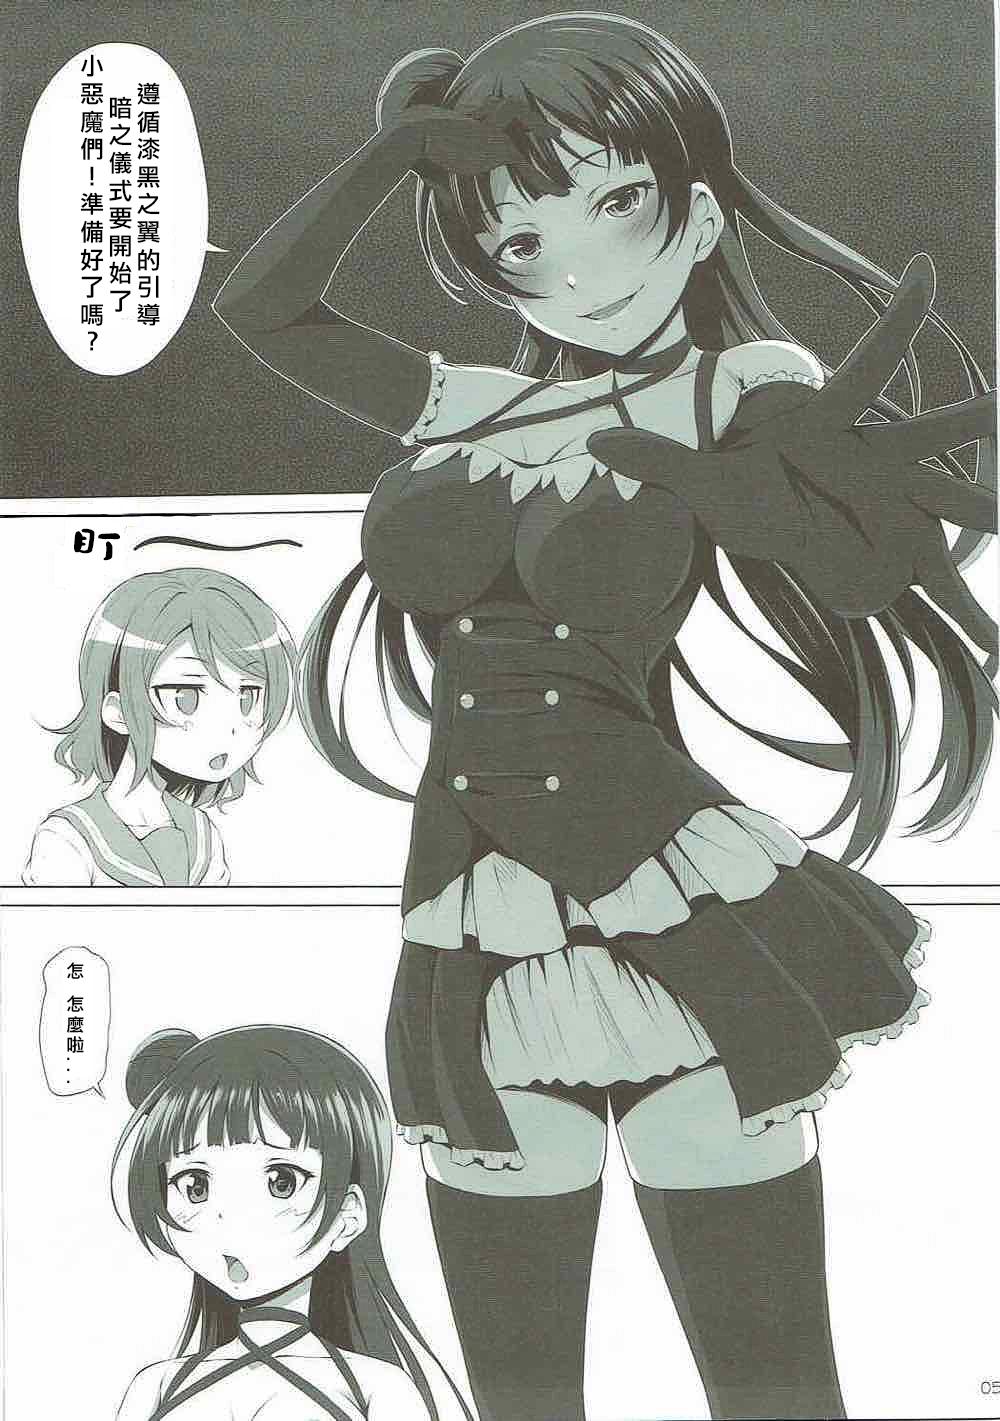 Titten Datenshi vs Cosplay Maou | 墮天使 VS Cosplay魔王 - Love live sunshine Interracial - Page 4